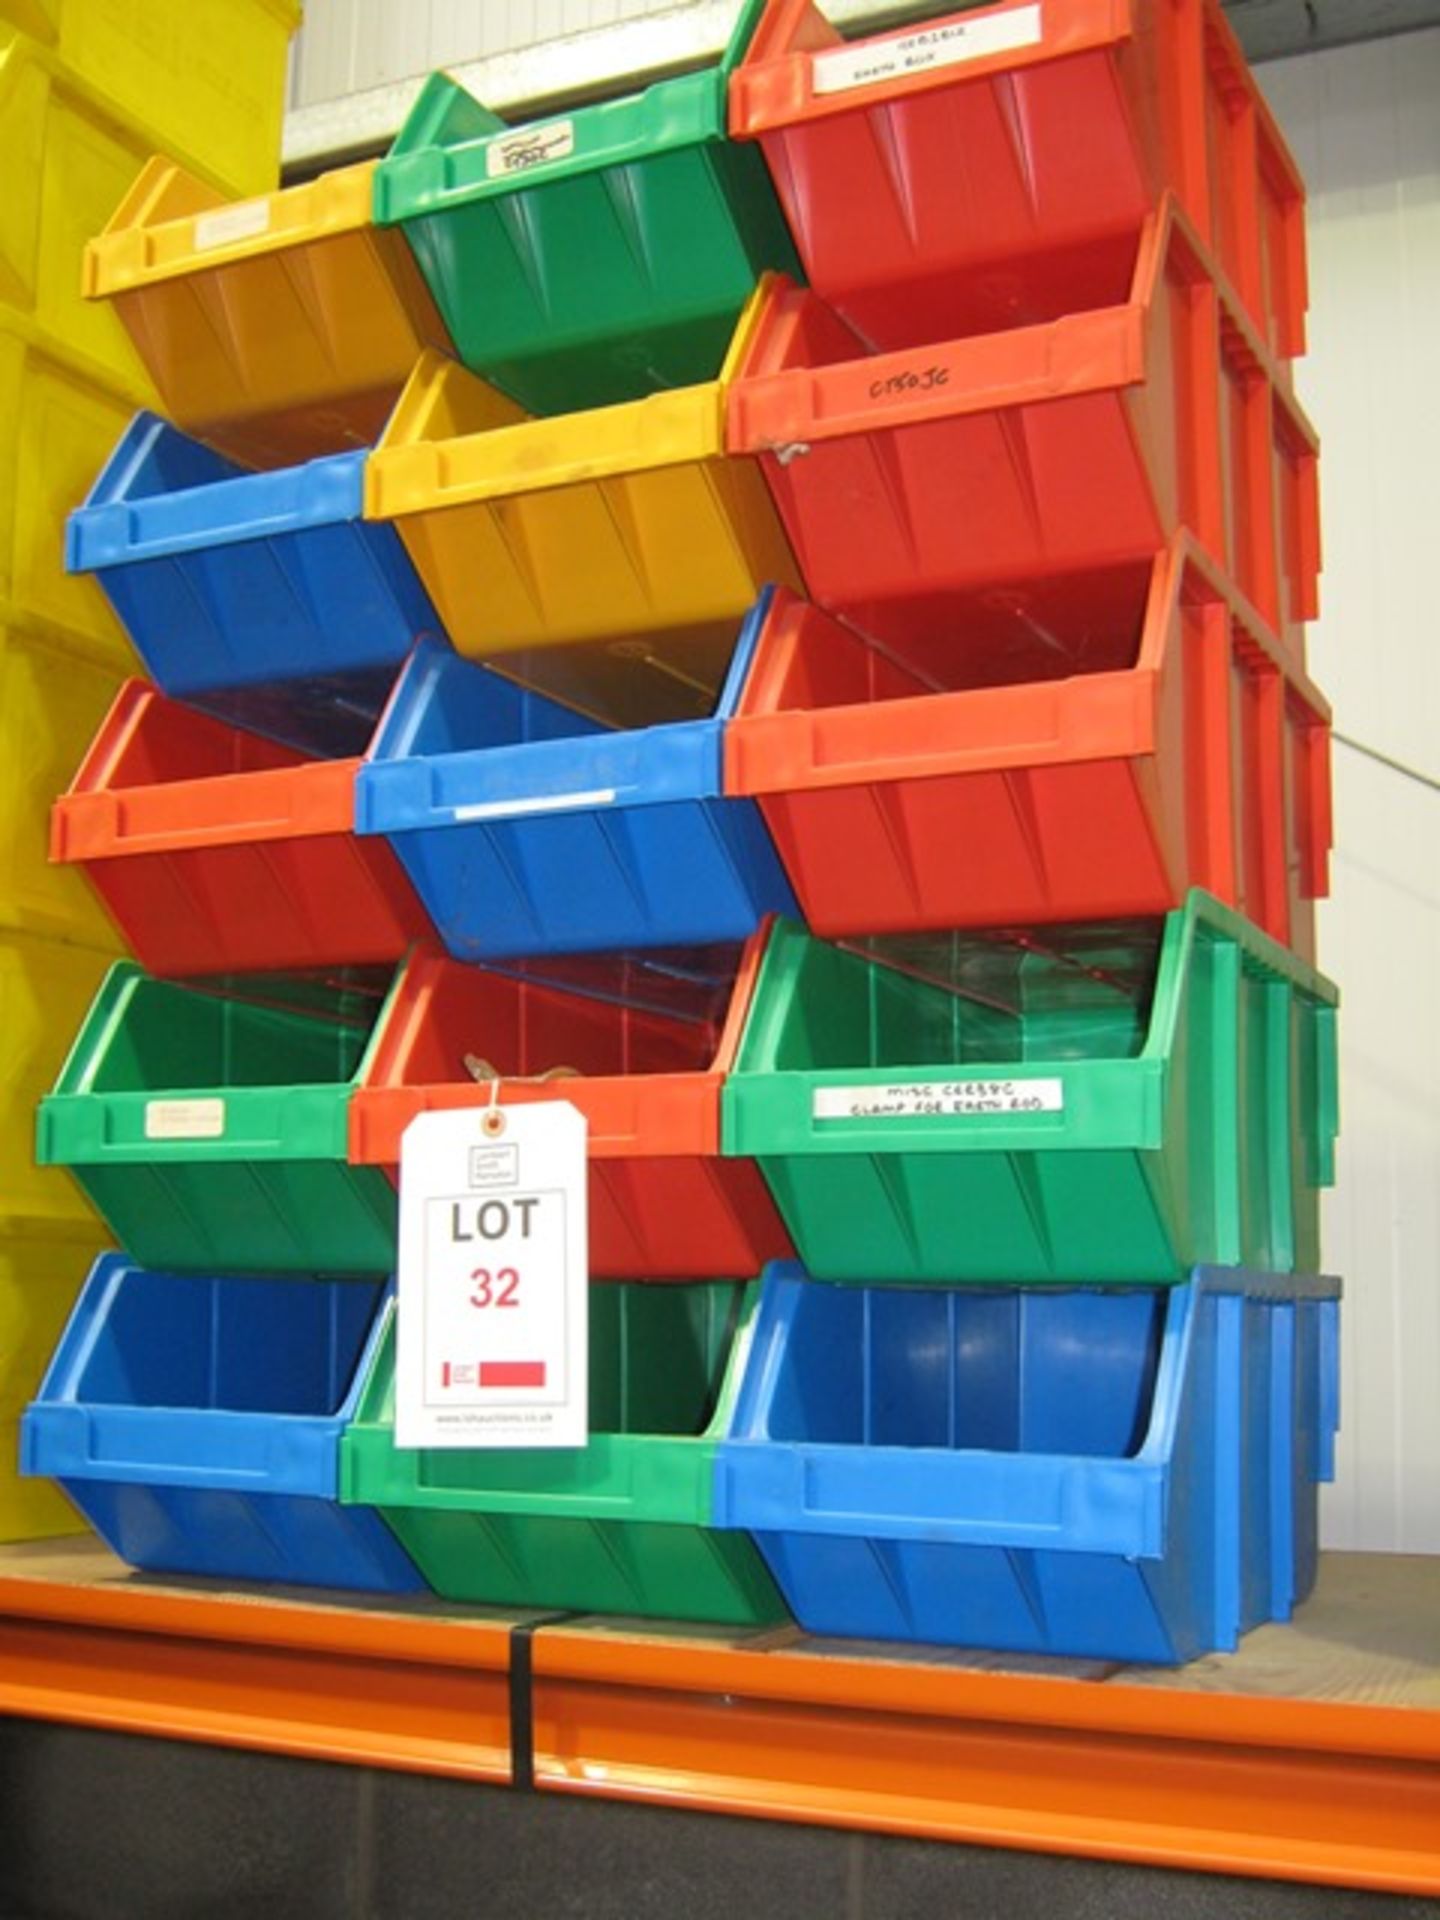 15 x Storage boxes, approx. size width 200mm x depth 300mm x height 170mm